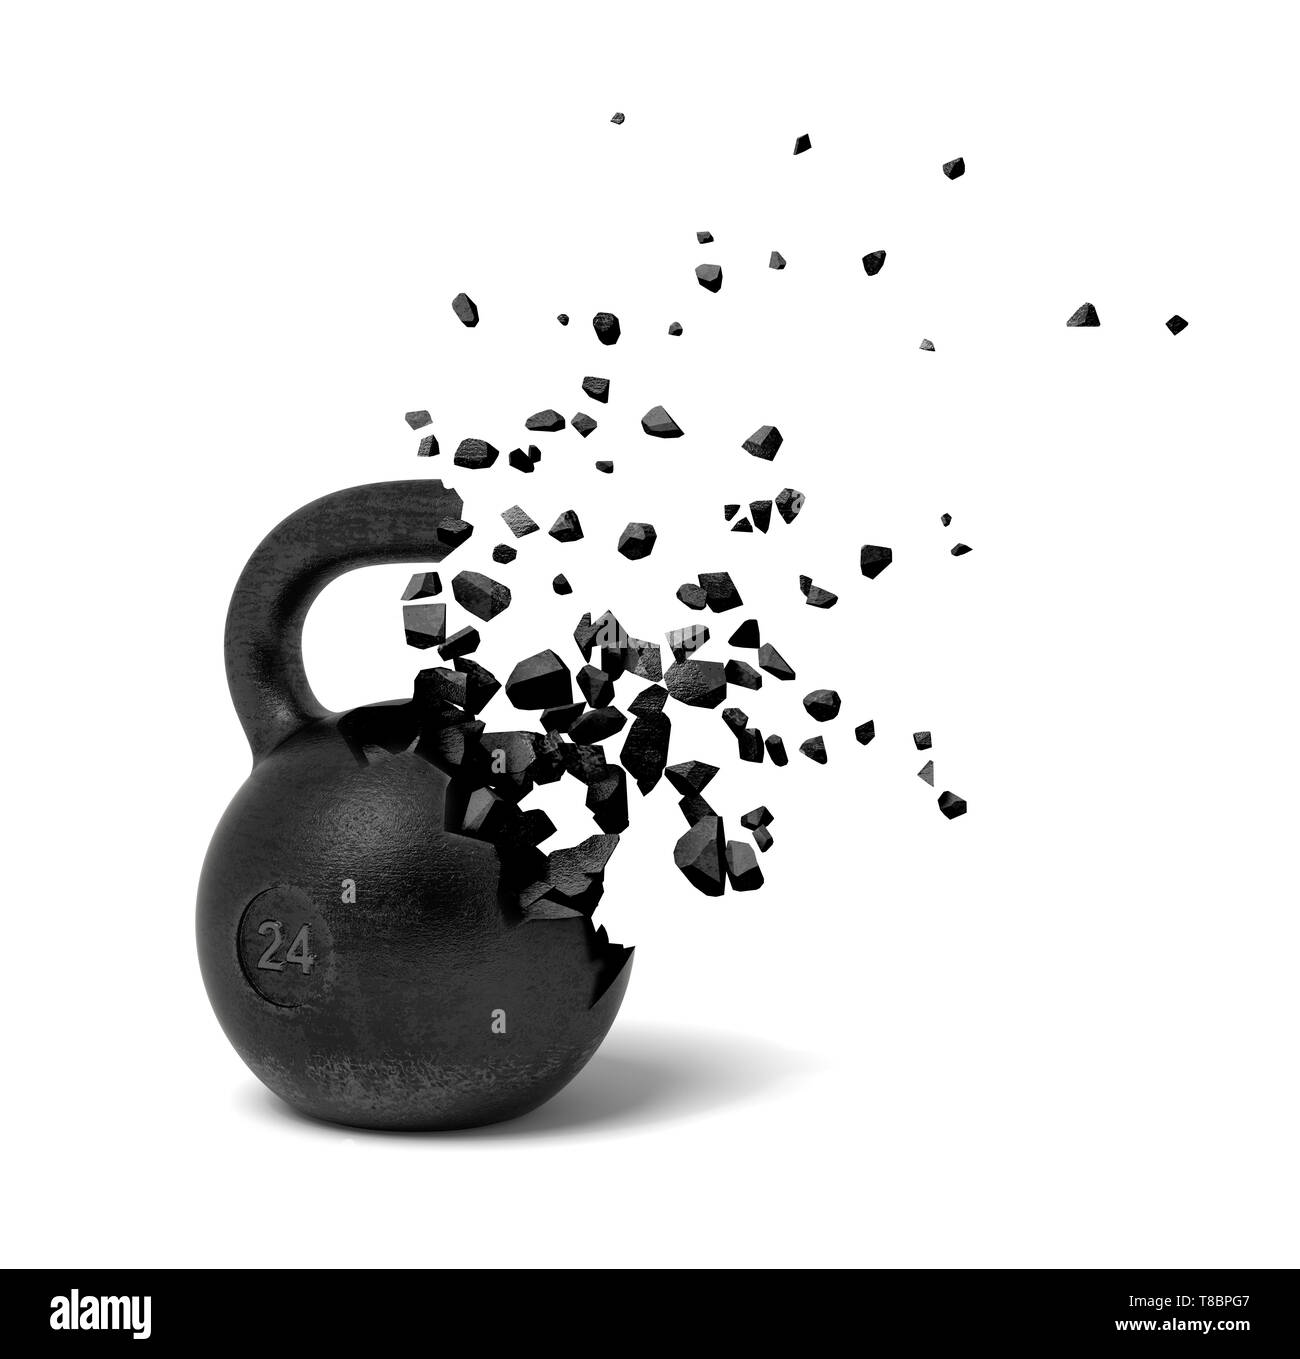 3d rendering of black kettlebell starting to disslove into pieces on white background. Stock Photo